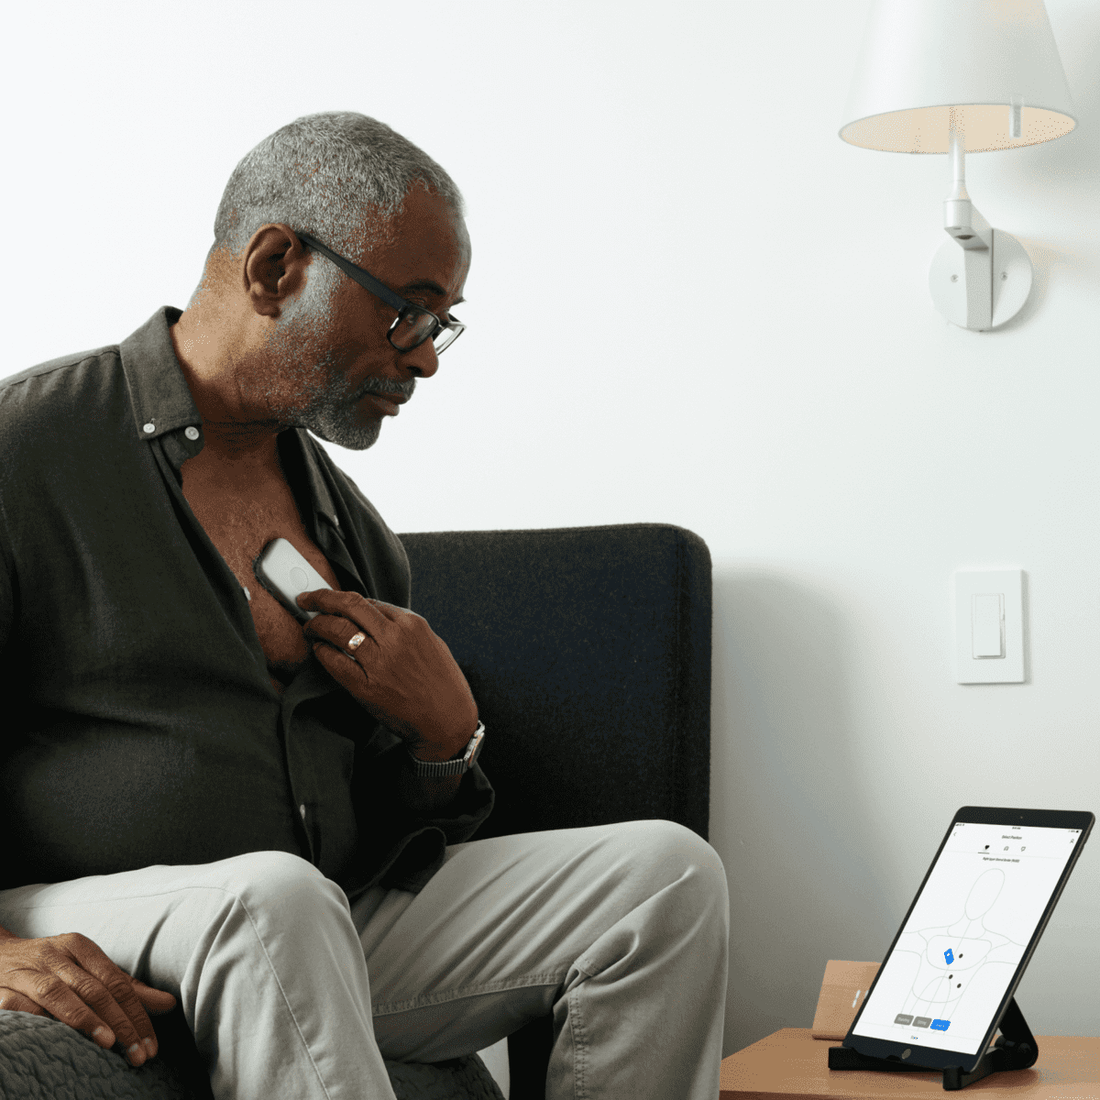 Patient using DUO 2 to record ECG and heart sounds on tablet